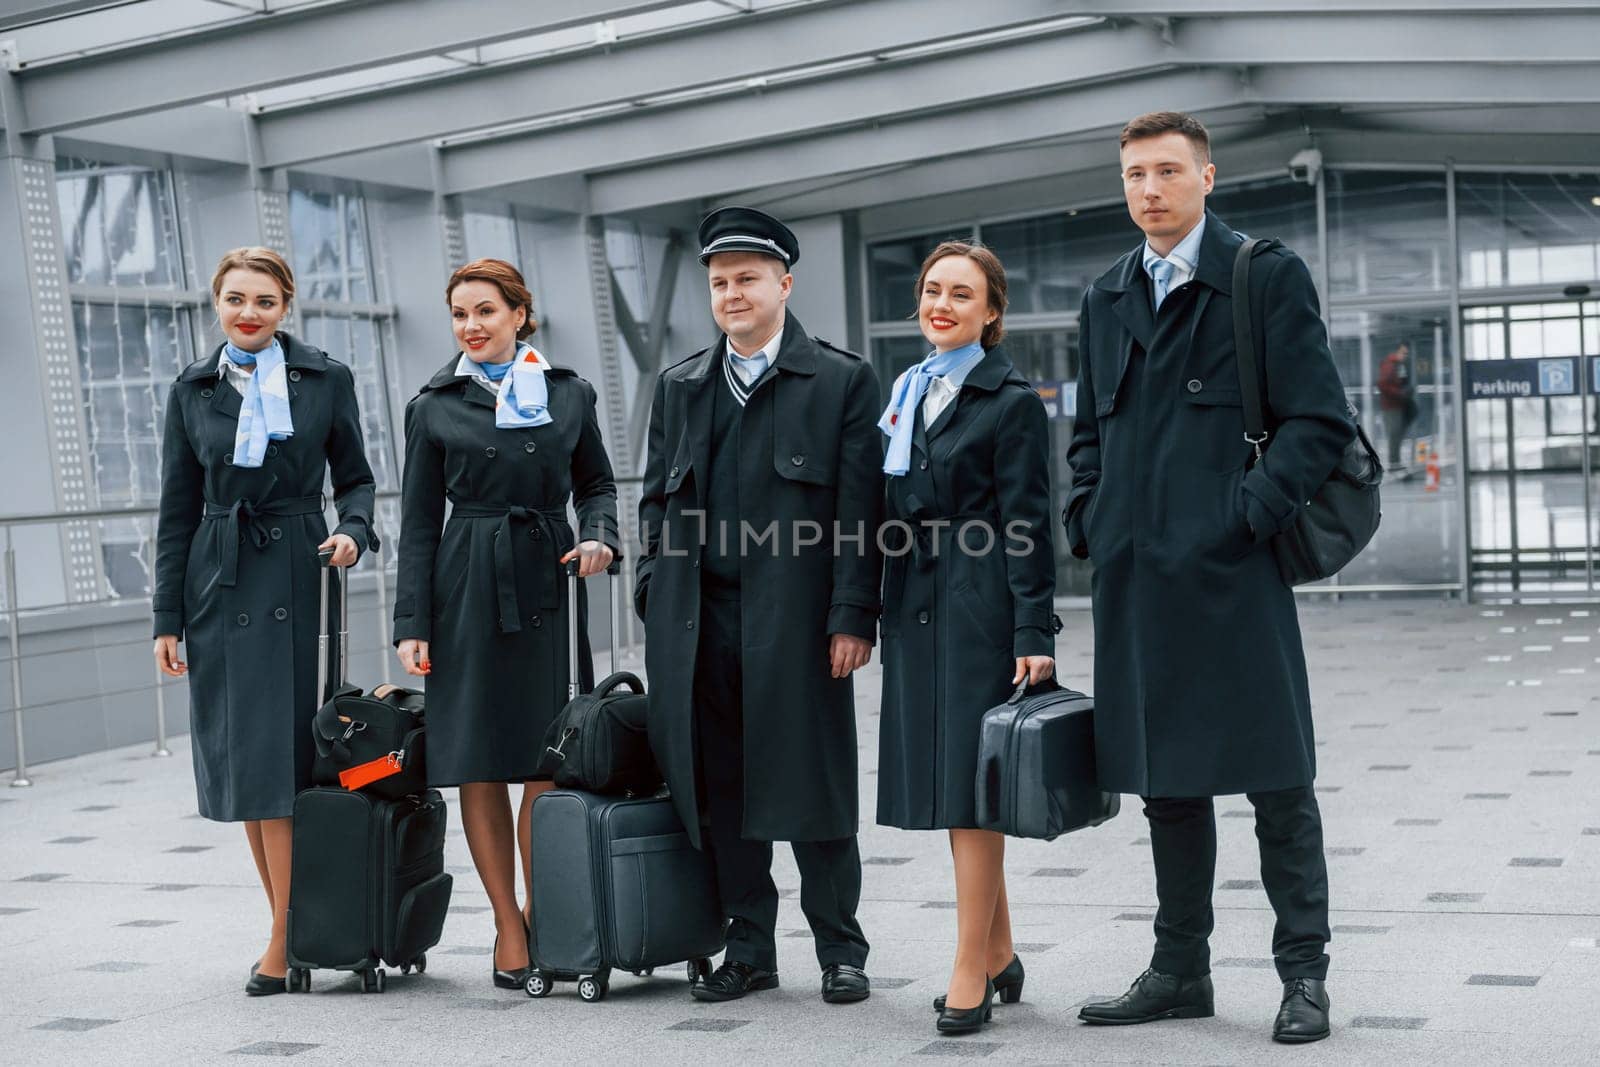 Aircraft crew in work uniform is together outdoors in the airport.